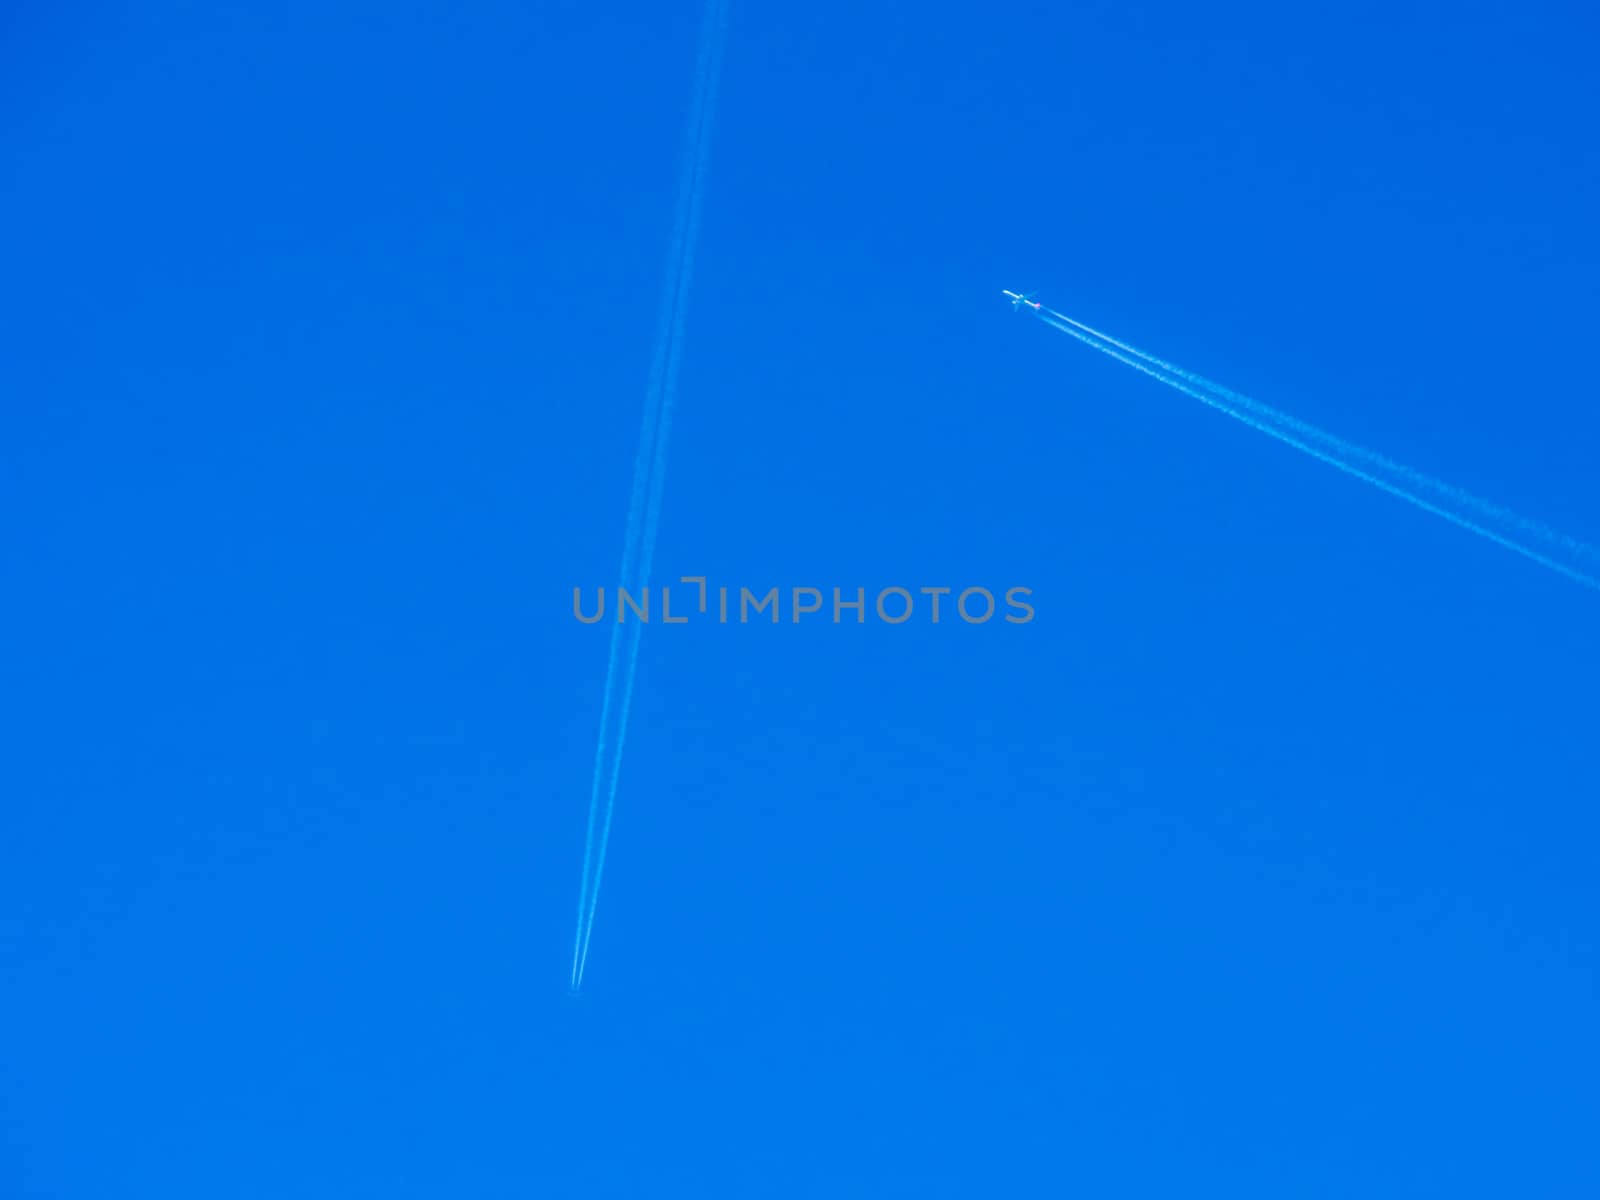 Aeroplanes flying through clear blue sky with vapour trails